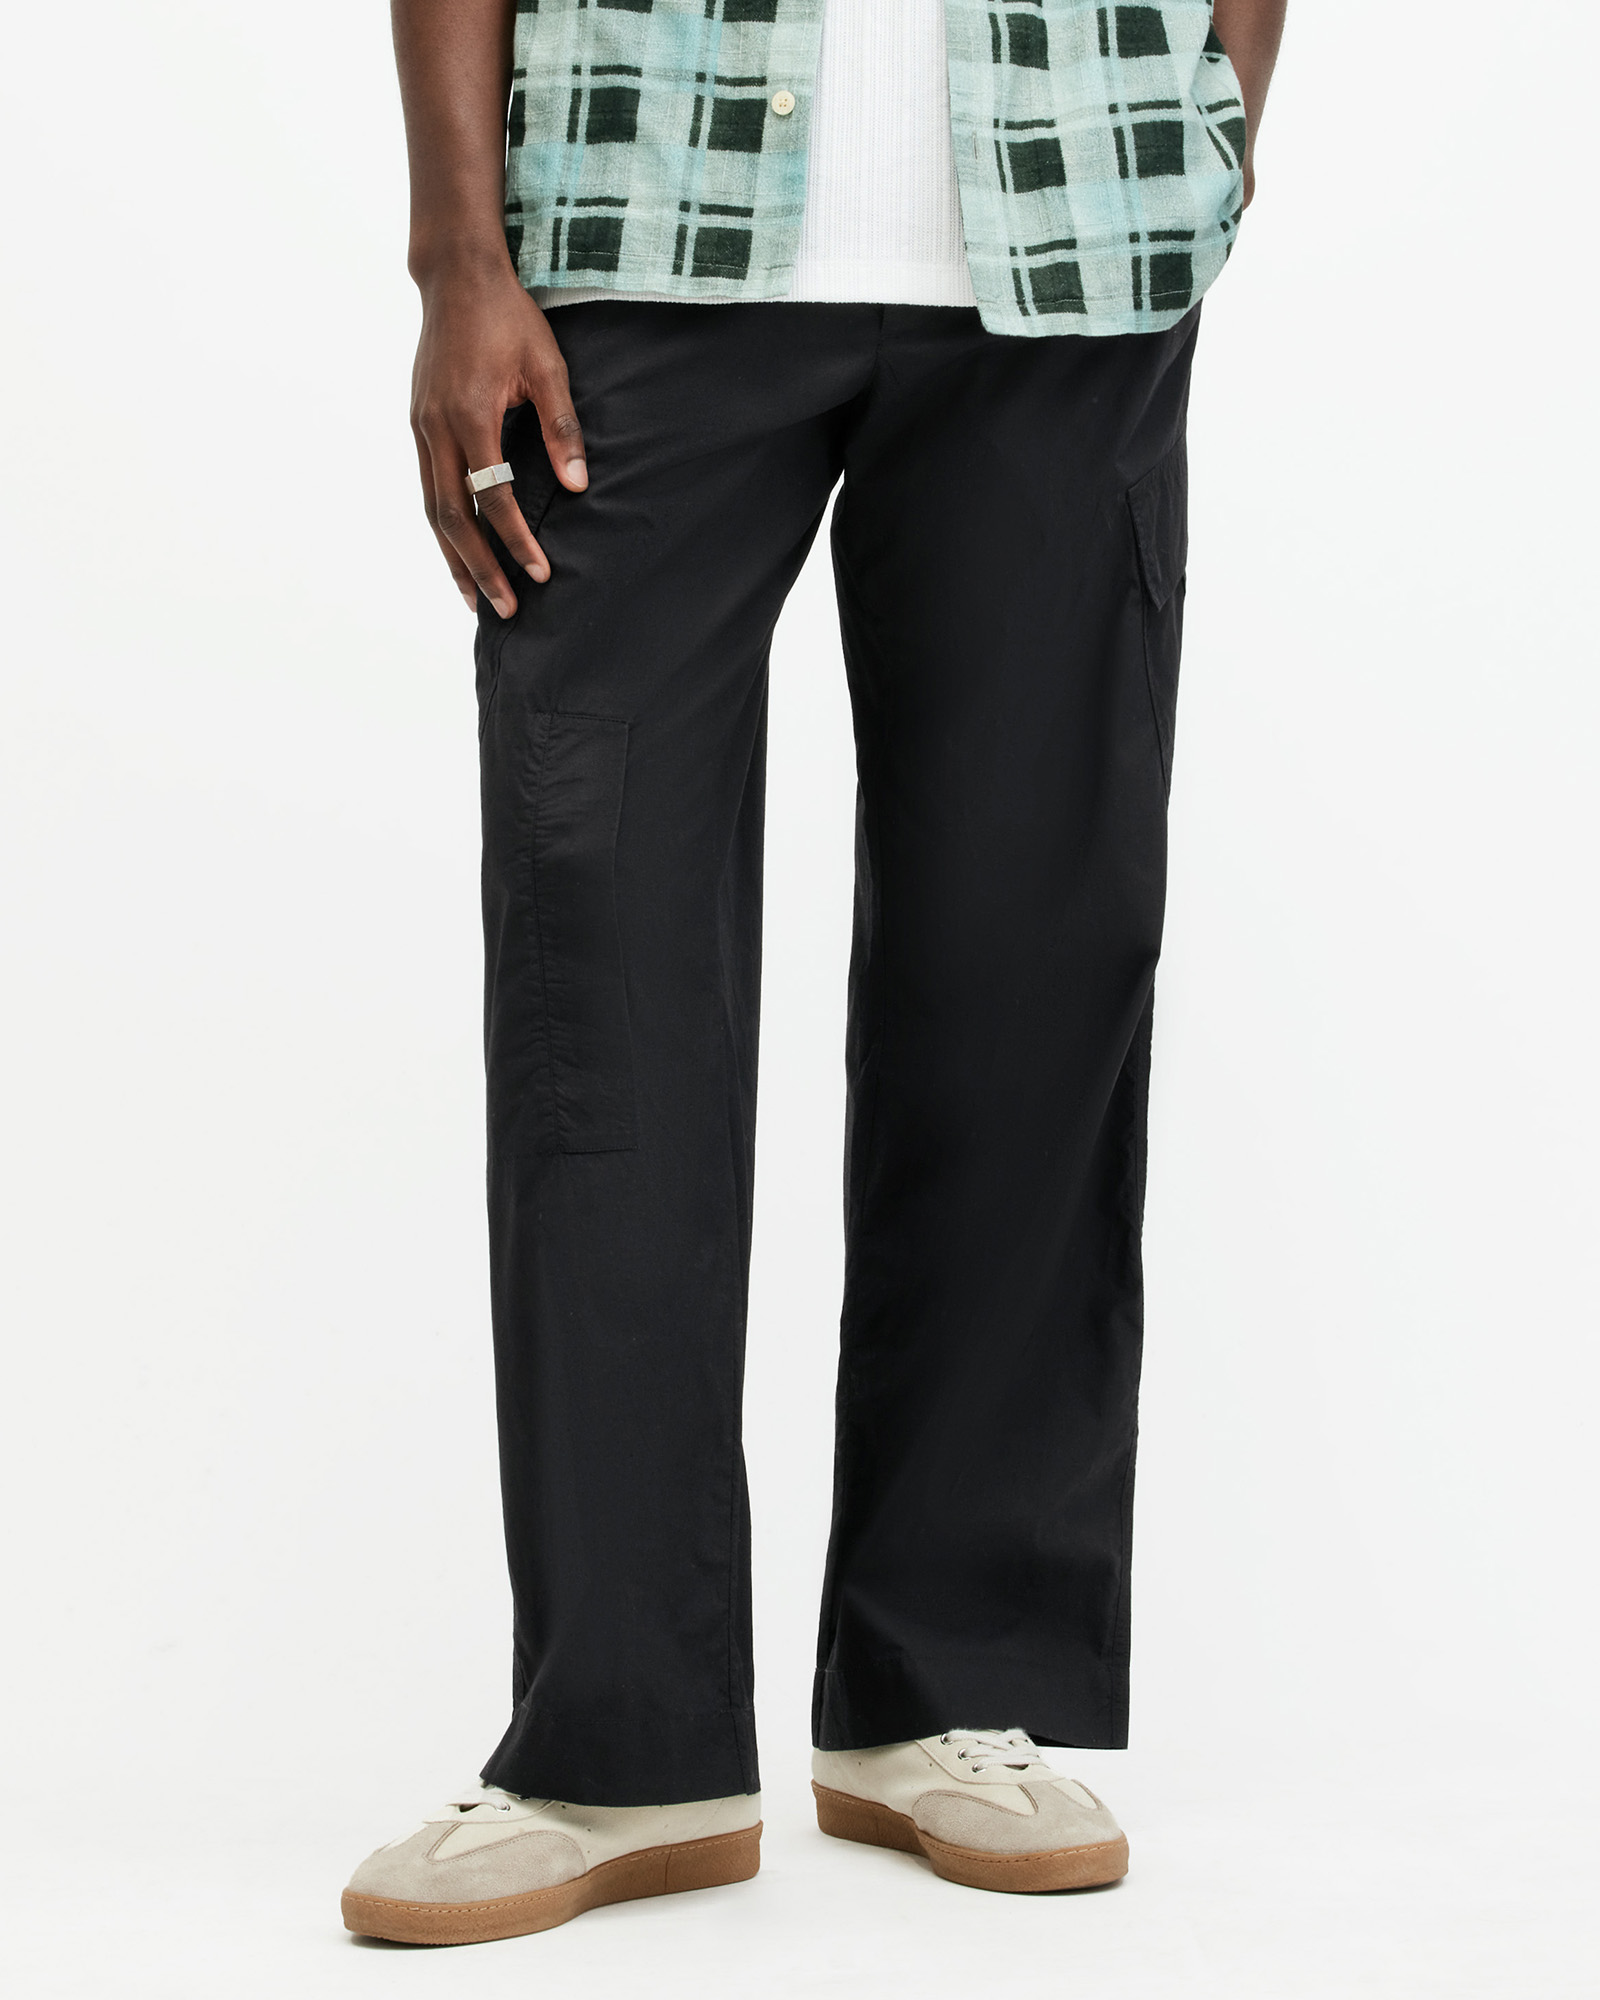 AllSaints Verge Wide Leg Relaxed Fit Cargo Trousers,, Size: